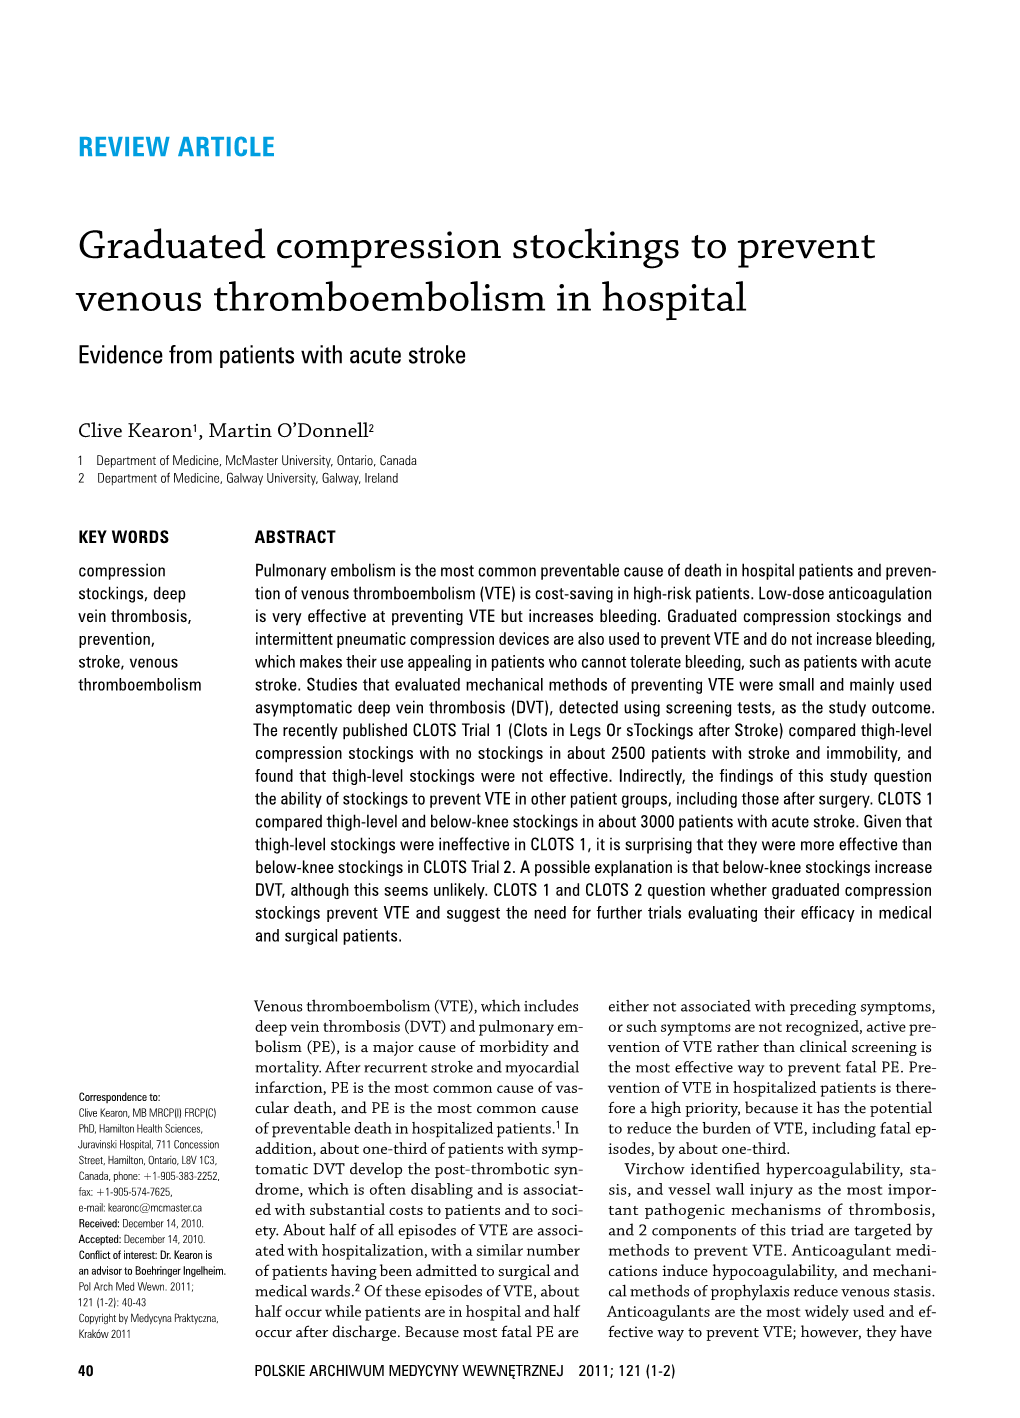 Graduated Compression Stockings to Prevent Venous Thromboembolism in Hospital Evidence from Patients with Acute Stroke